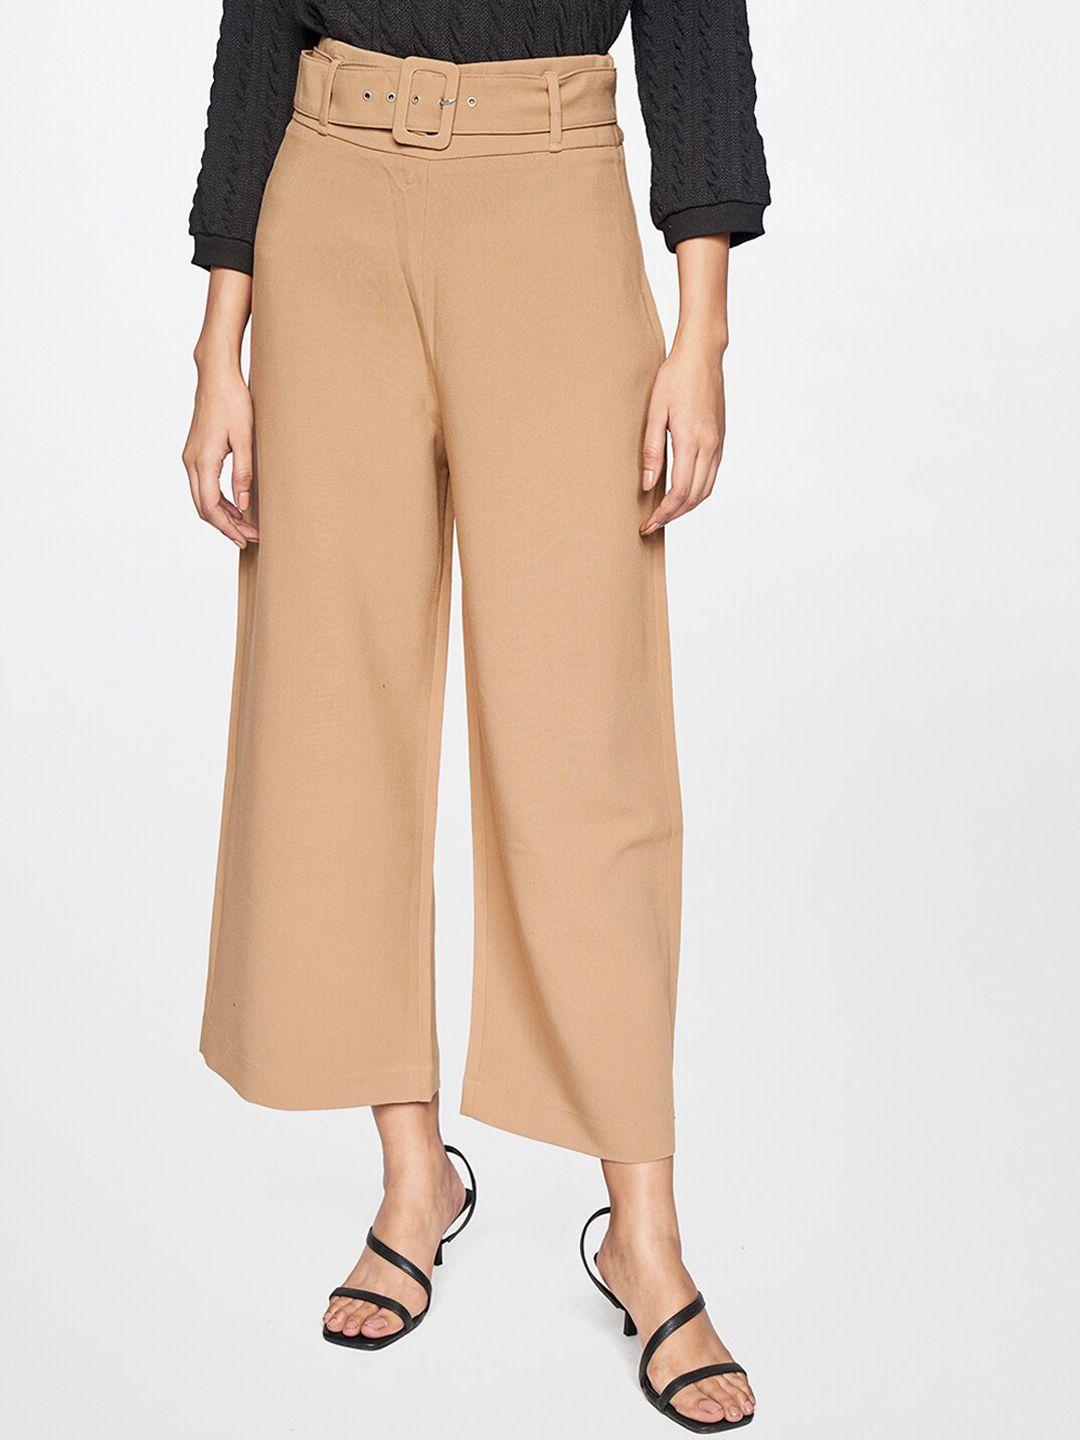 and-women-women-flared-trousers